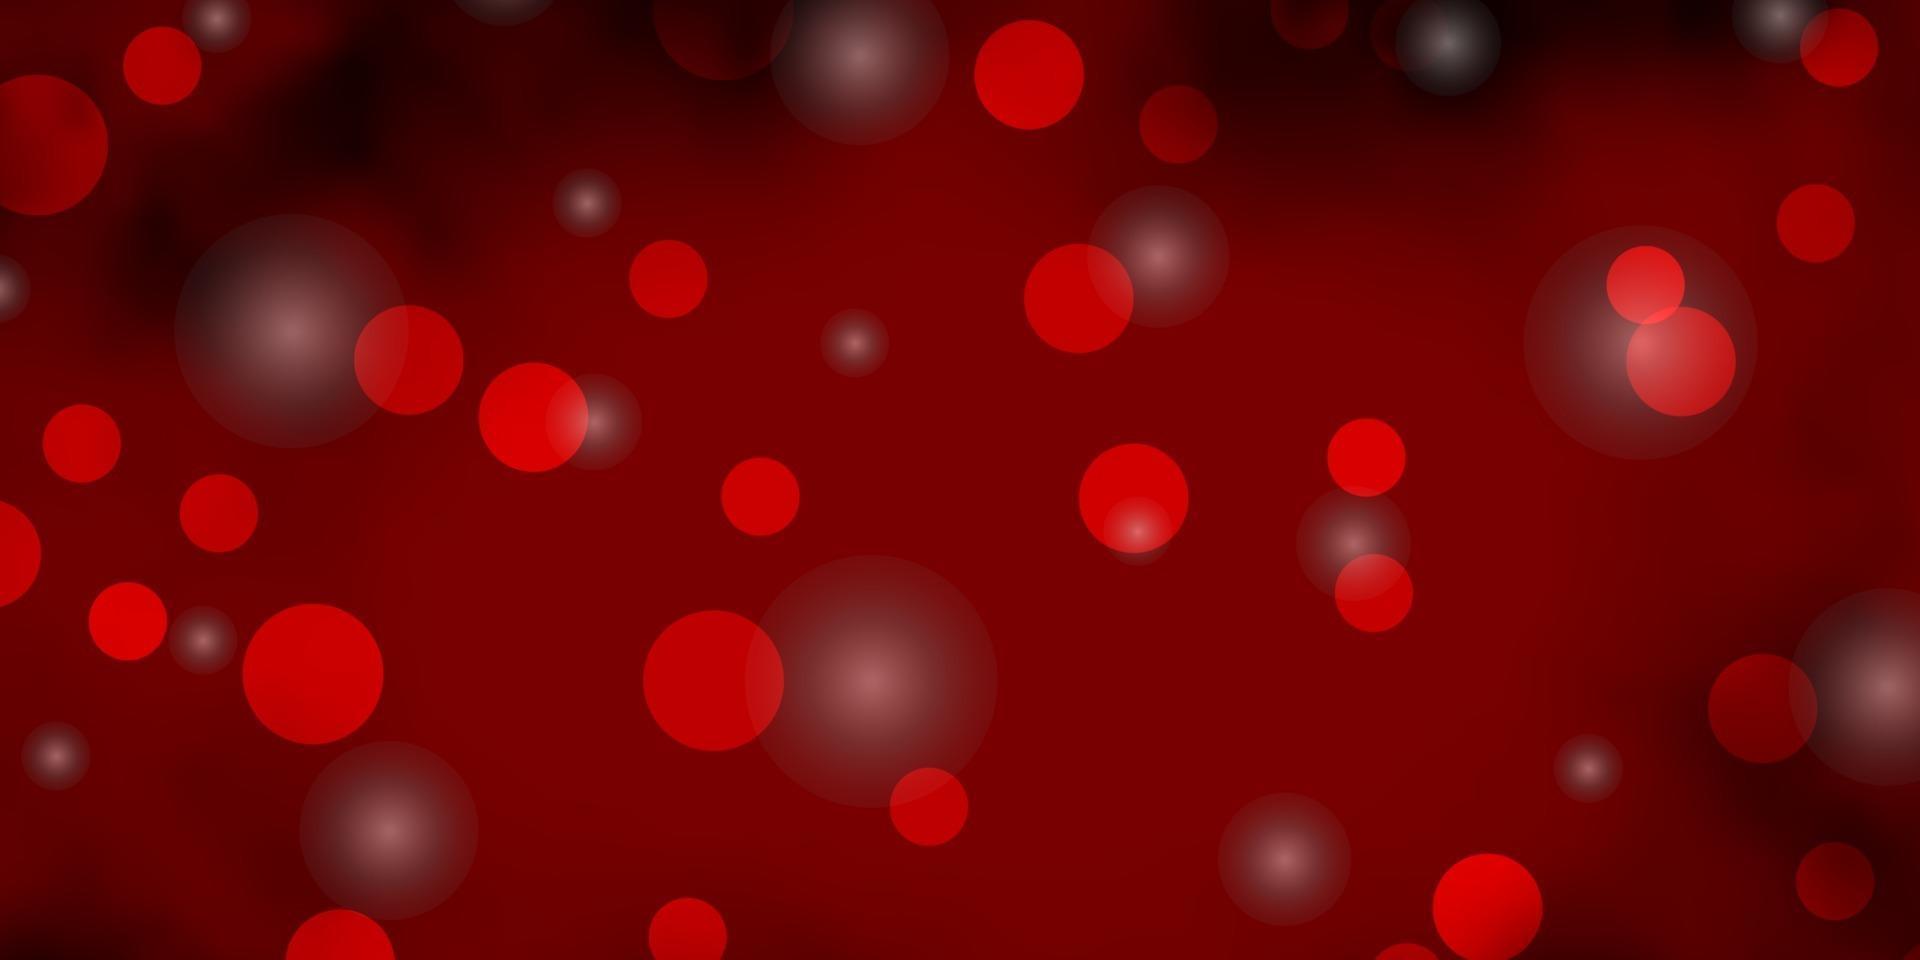 Dark Red vector layout with circles, stars.